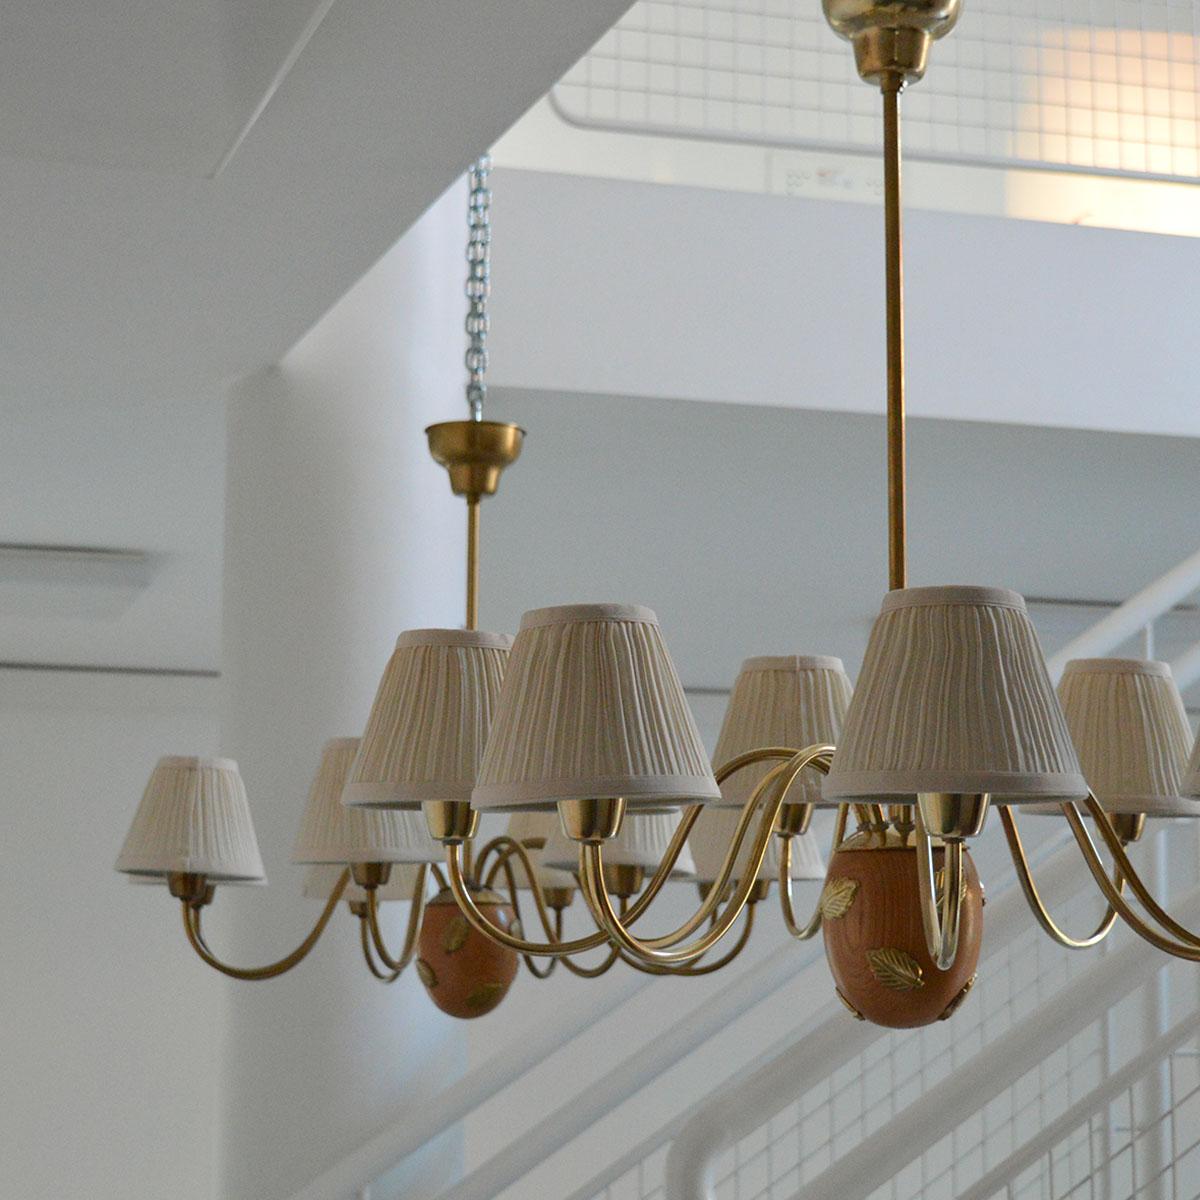 Pair of large 8-arm brass and wood chandeliers, model 10/8, designed by Hans Bergström and produced by Ateljé Lyktan in Sweden, 1940s.

Designed by the Swedish architect and designer Hans Bergström, each of these chandeliers features eight curved